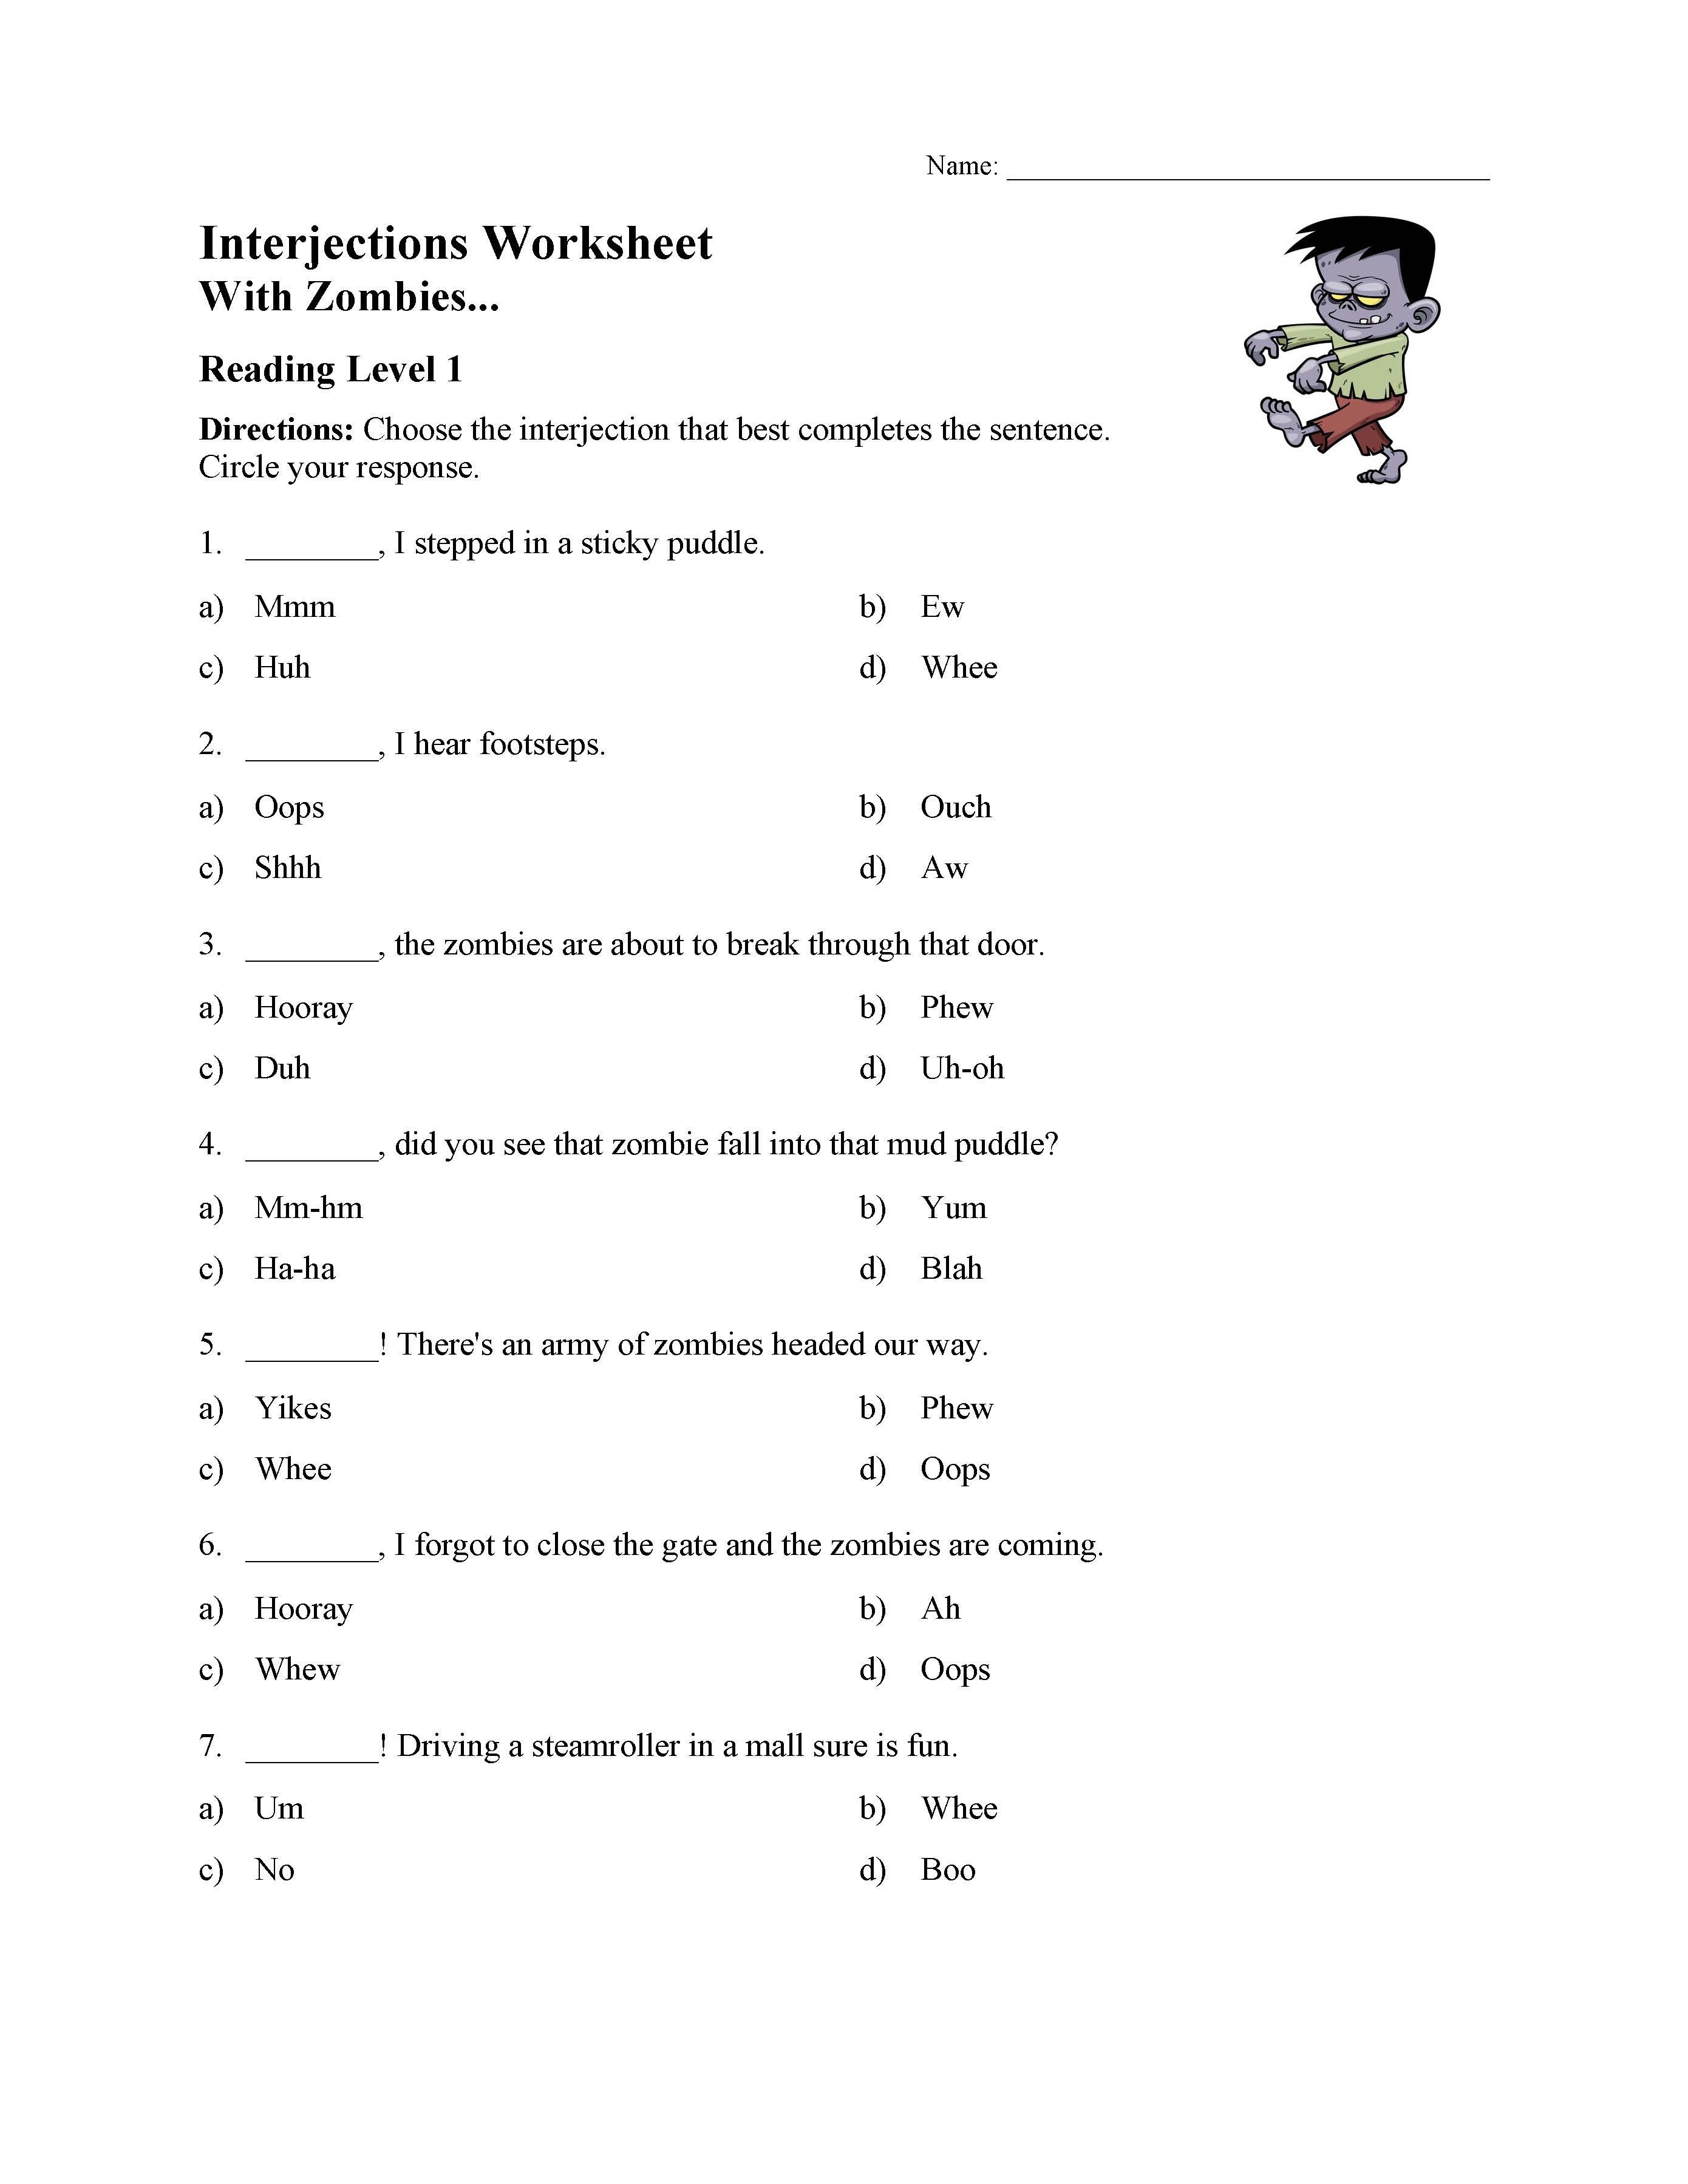 This is a preview image of the Interjections Worksheet - Reading Level 1.